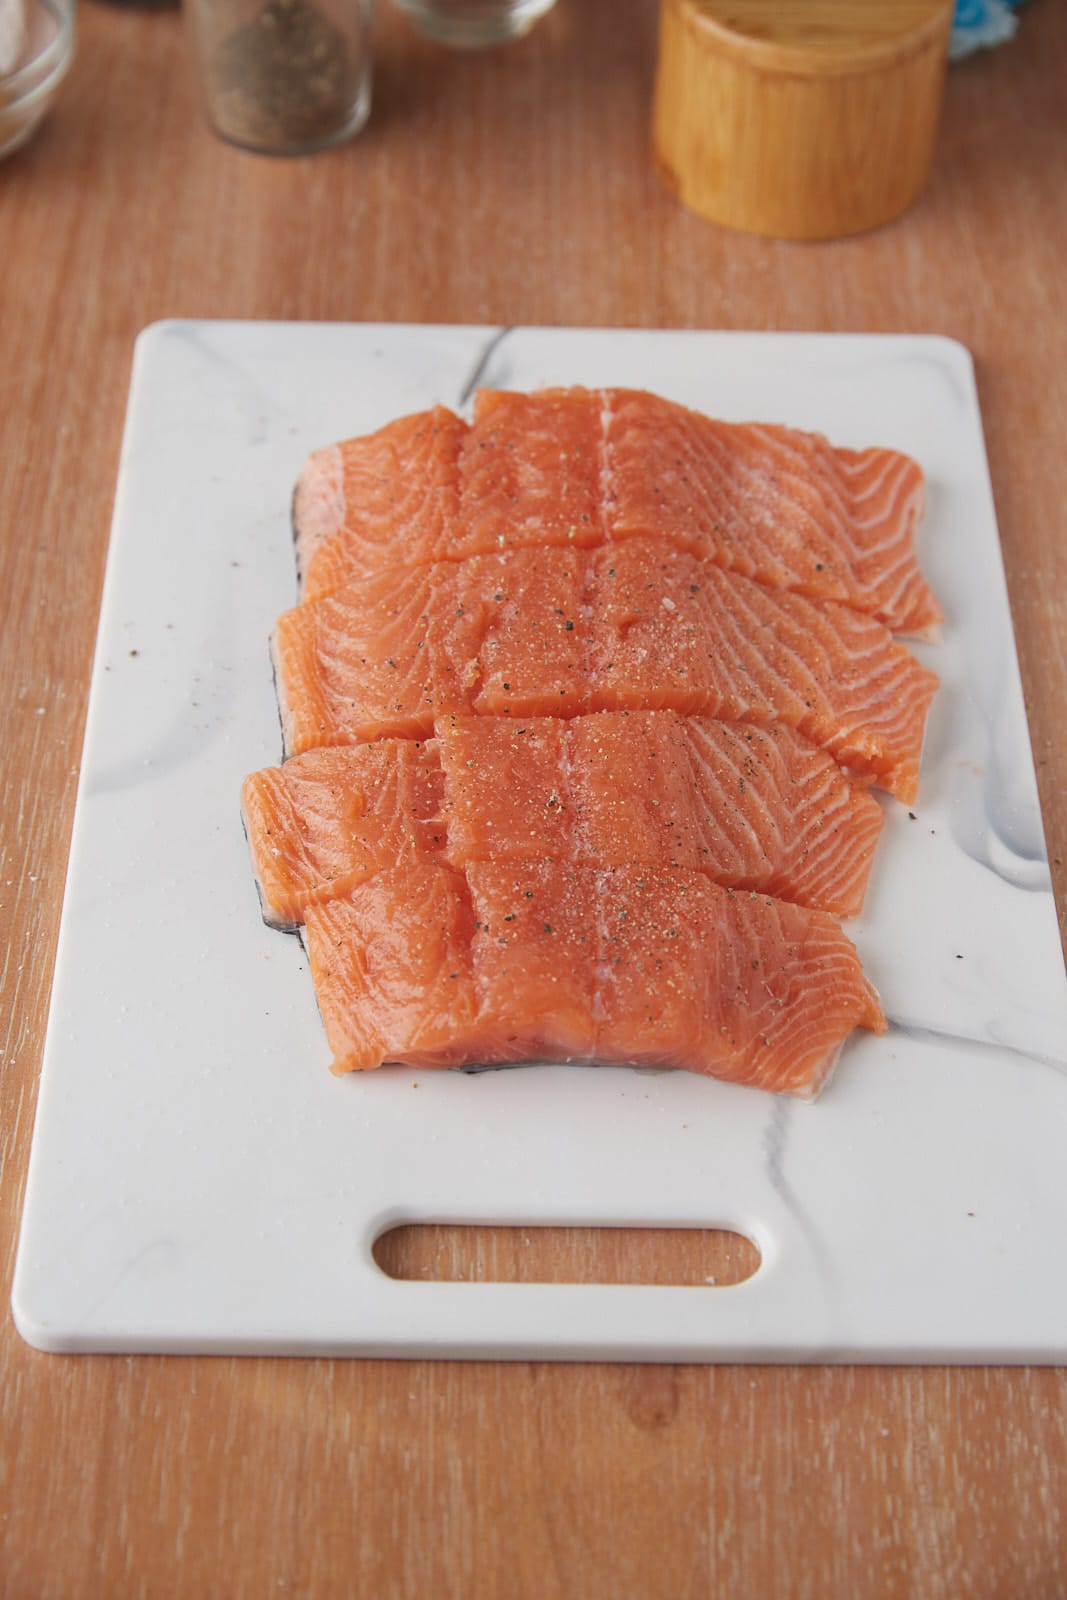 A fillet of salmon cut into 4 pieces.